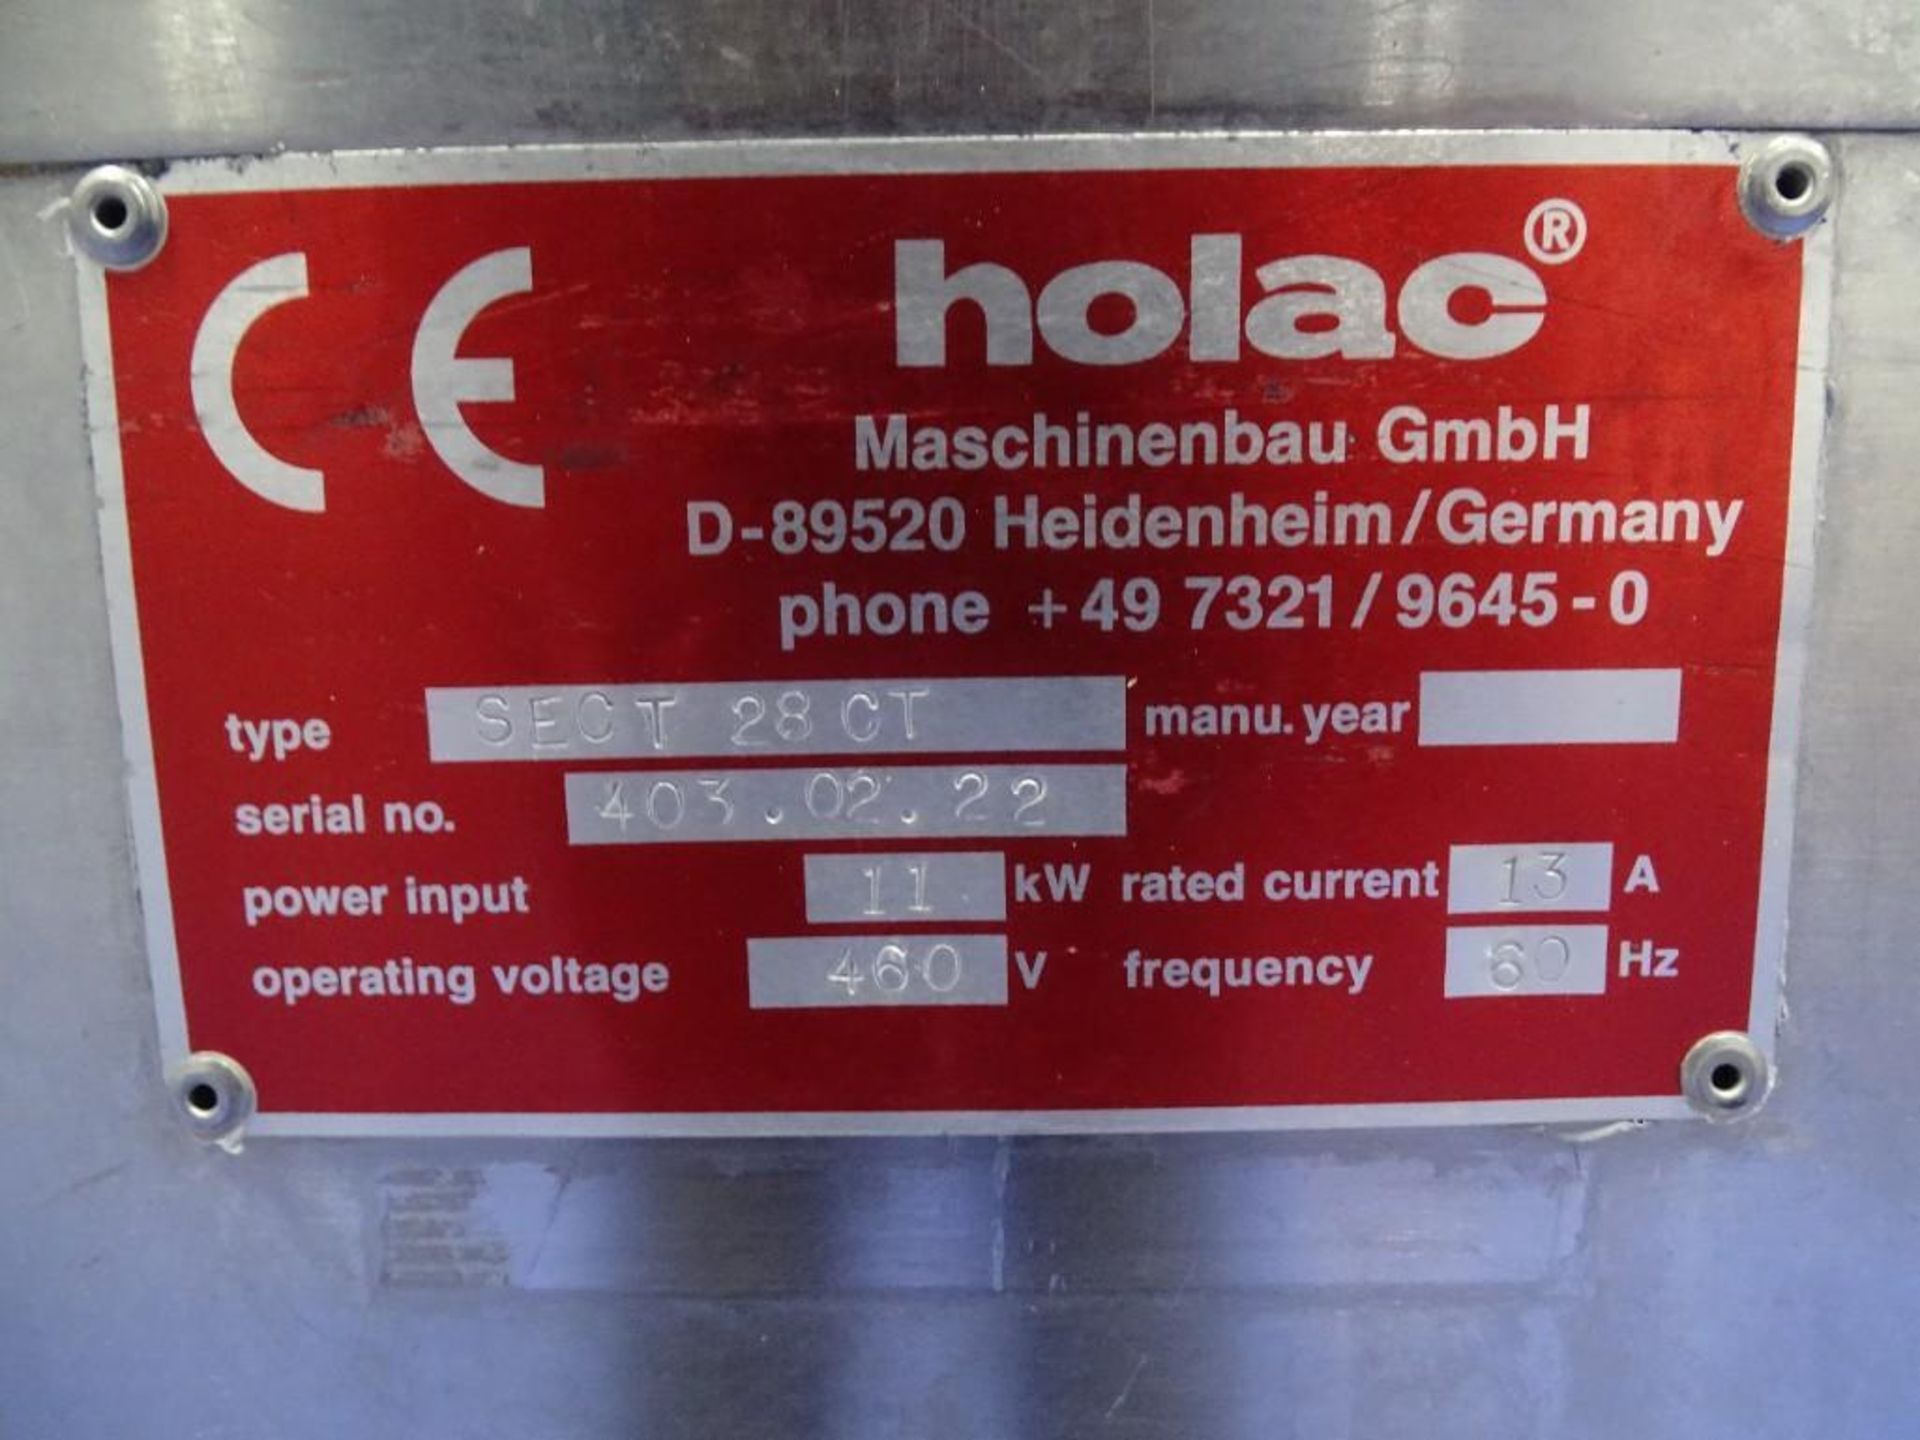 Holac Sect 28 CT Continuous High Volume Slicer - Image 7 of 7